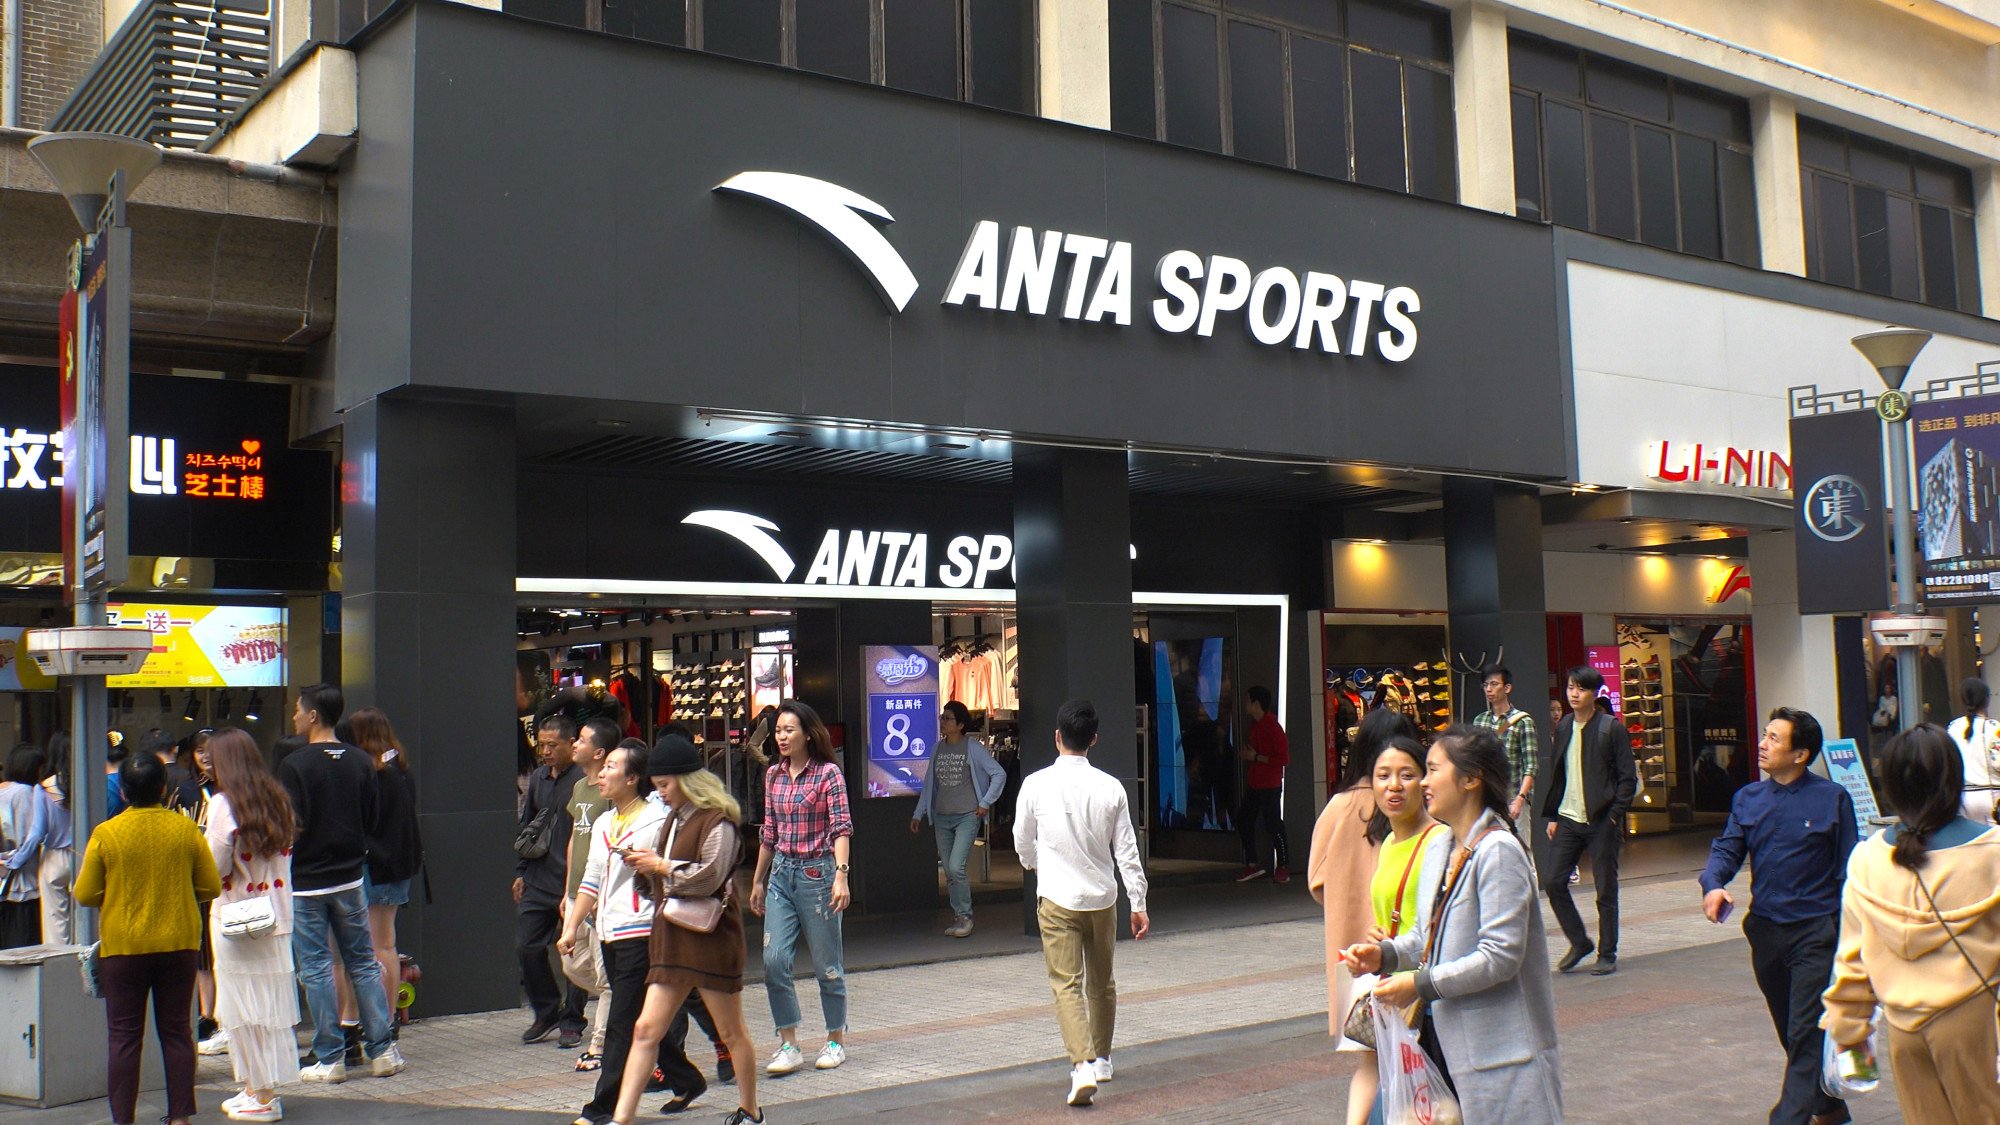 Anta Sports and Li-Ning rival Nike and Adidas for sportswear sales in  China, but are virtually unknown anywhere else